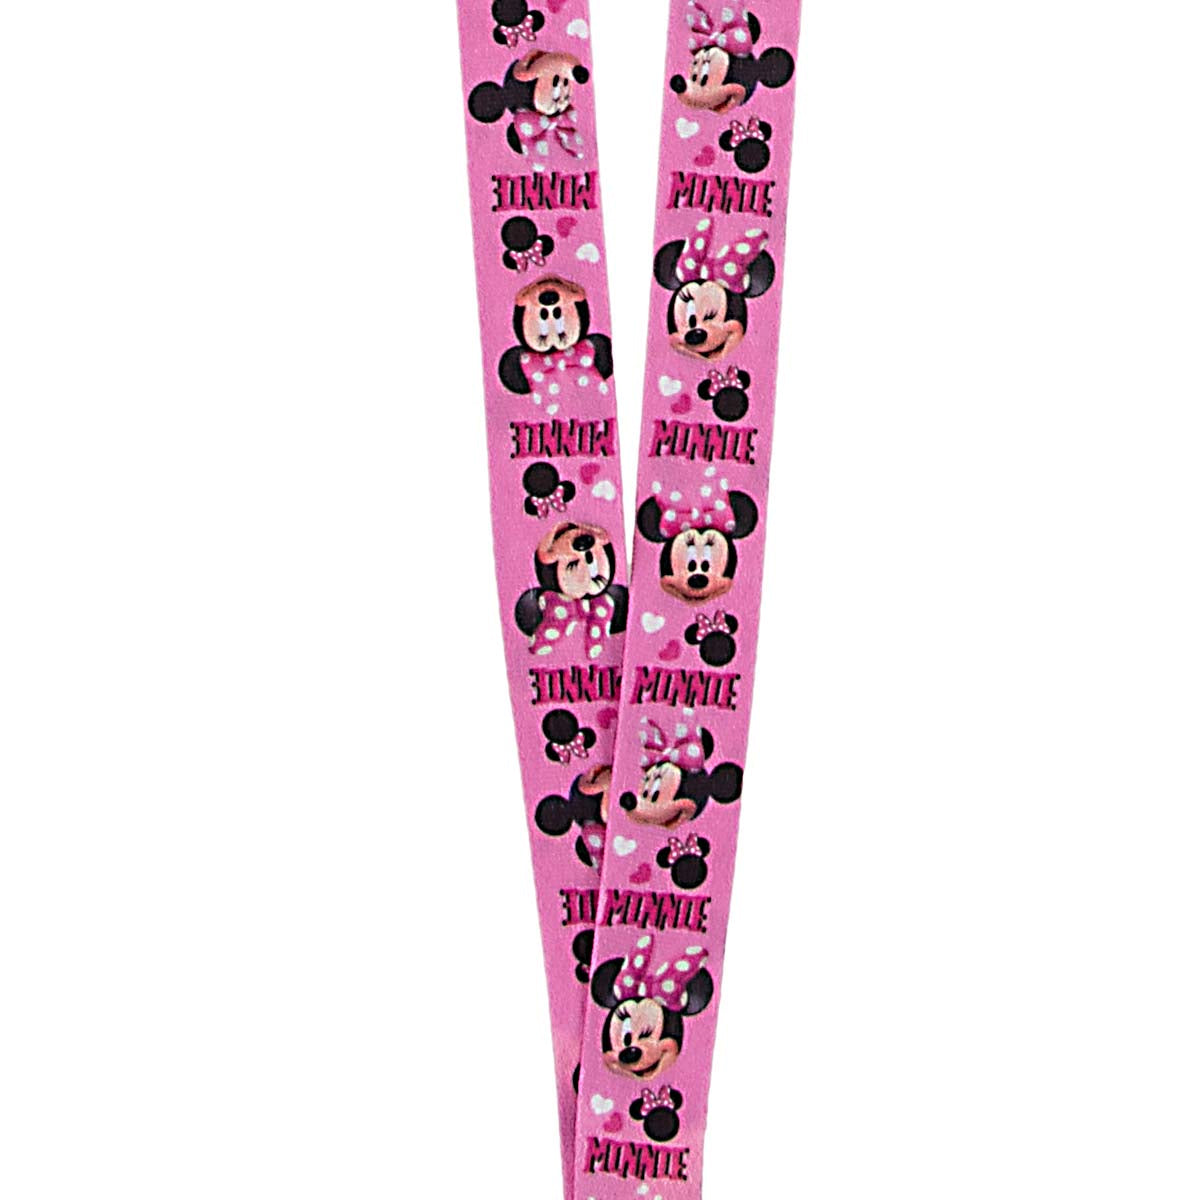 Disney Lanyard With Metal Clasp – For Keychain, ID’s & More